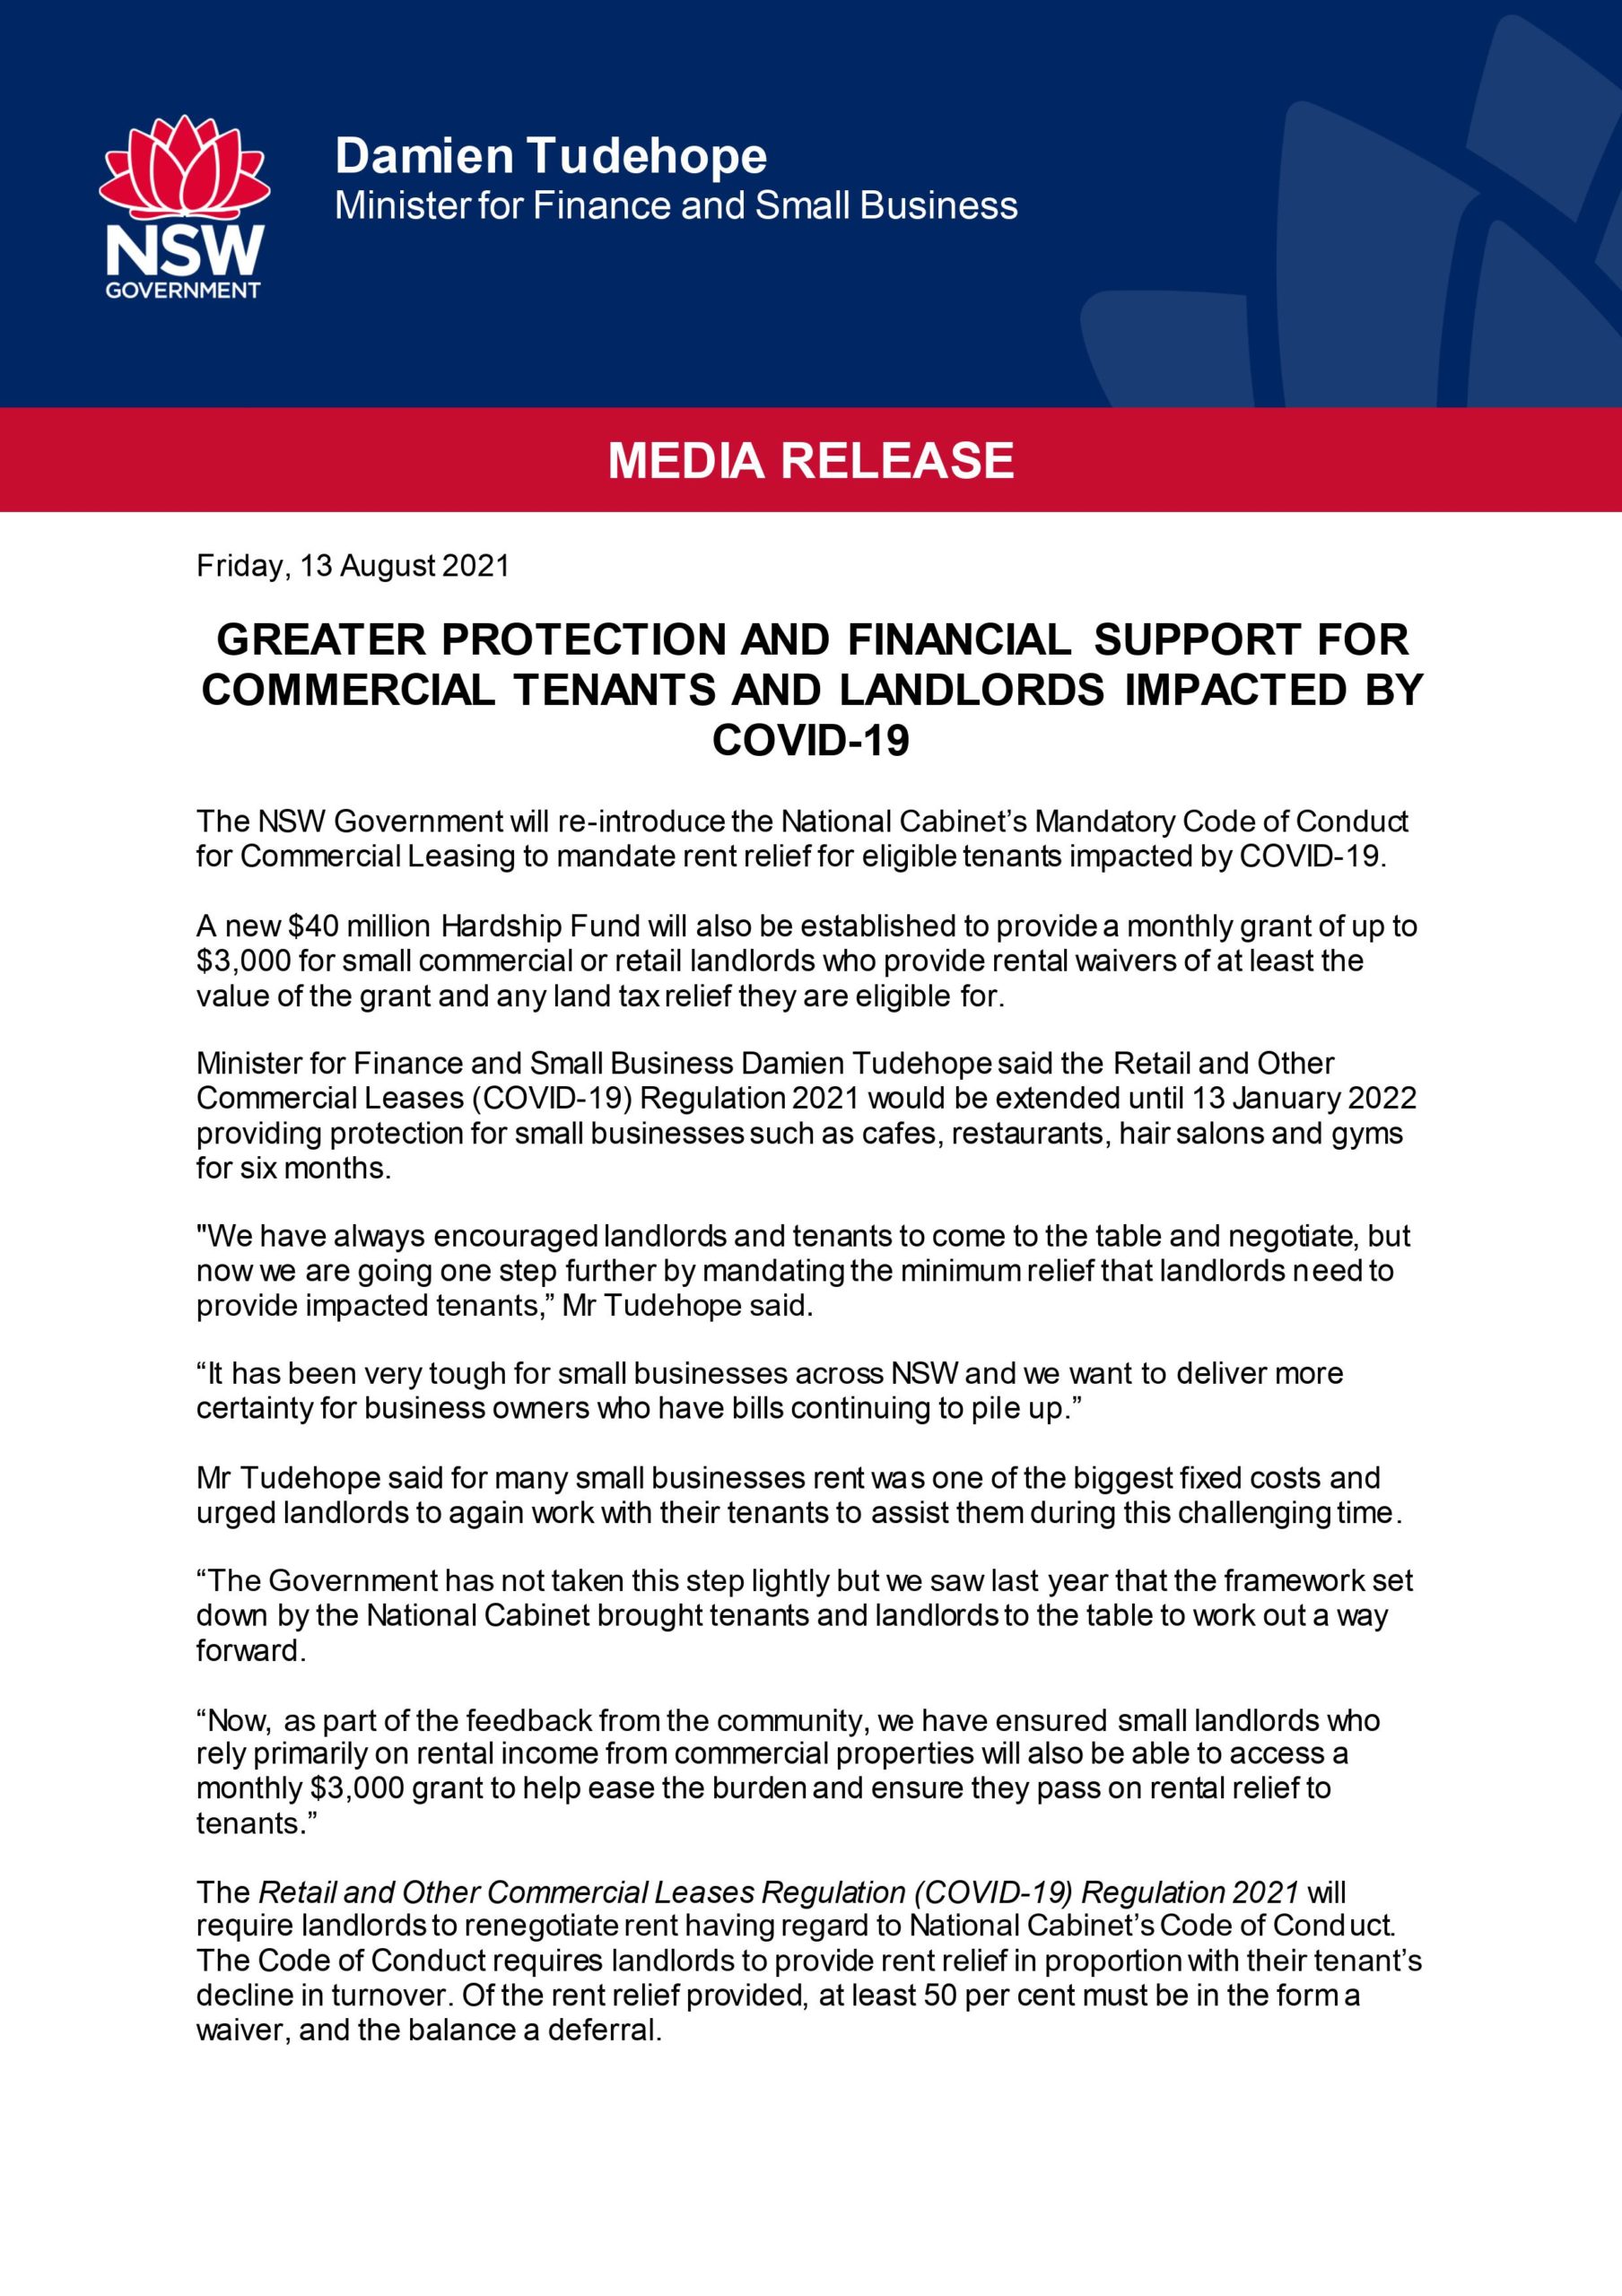 GREATER PROTECTION AND FINANCIAL SUPPORT FOR COMMERCIAL TENANTS AND LANDLORDS IMPACTED BY COVID-19